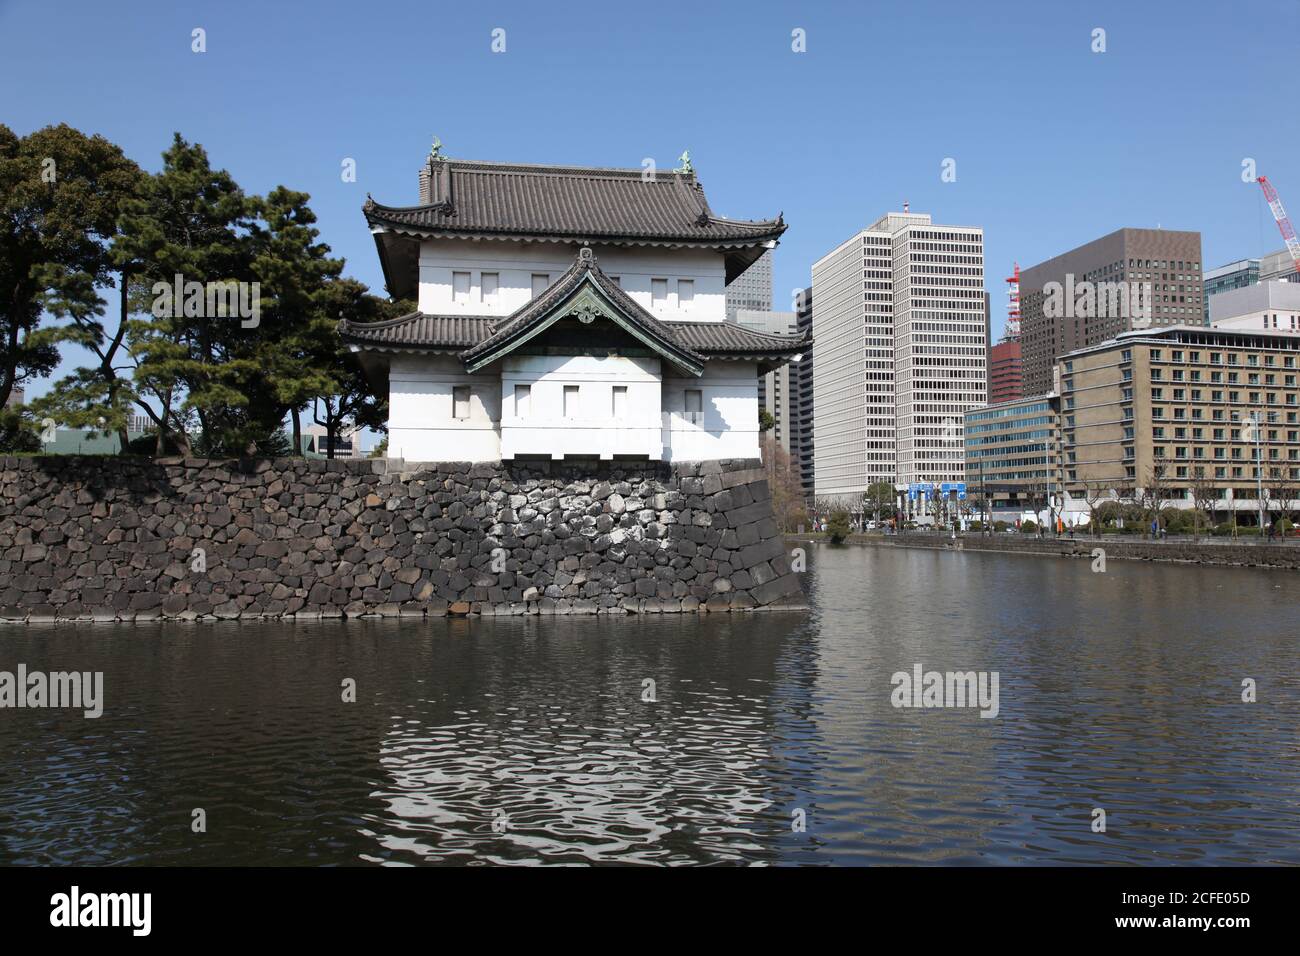 Ornate building above the moat around the Japanese Imperial Palace in Tokyo Stock Photo